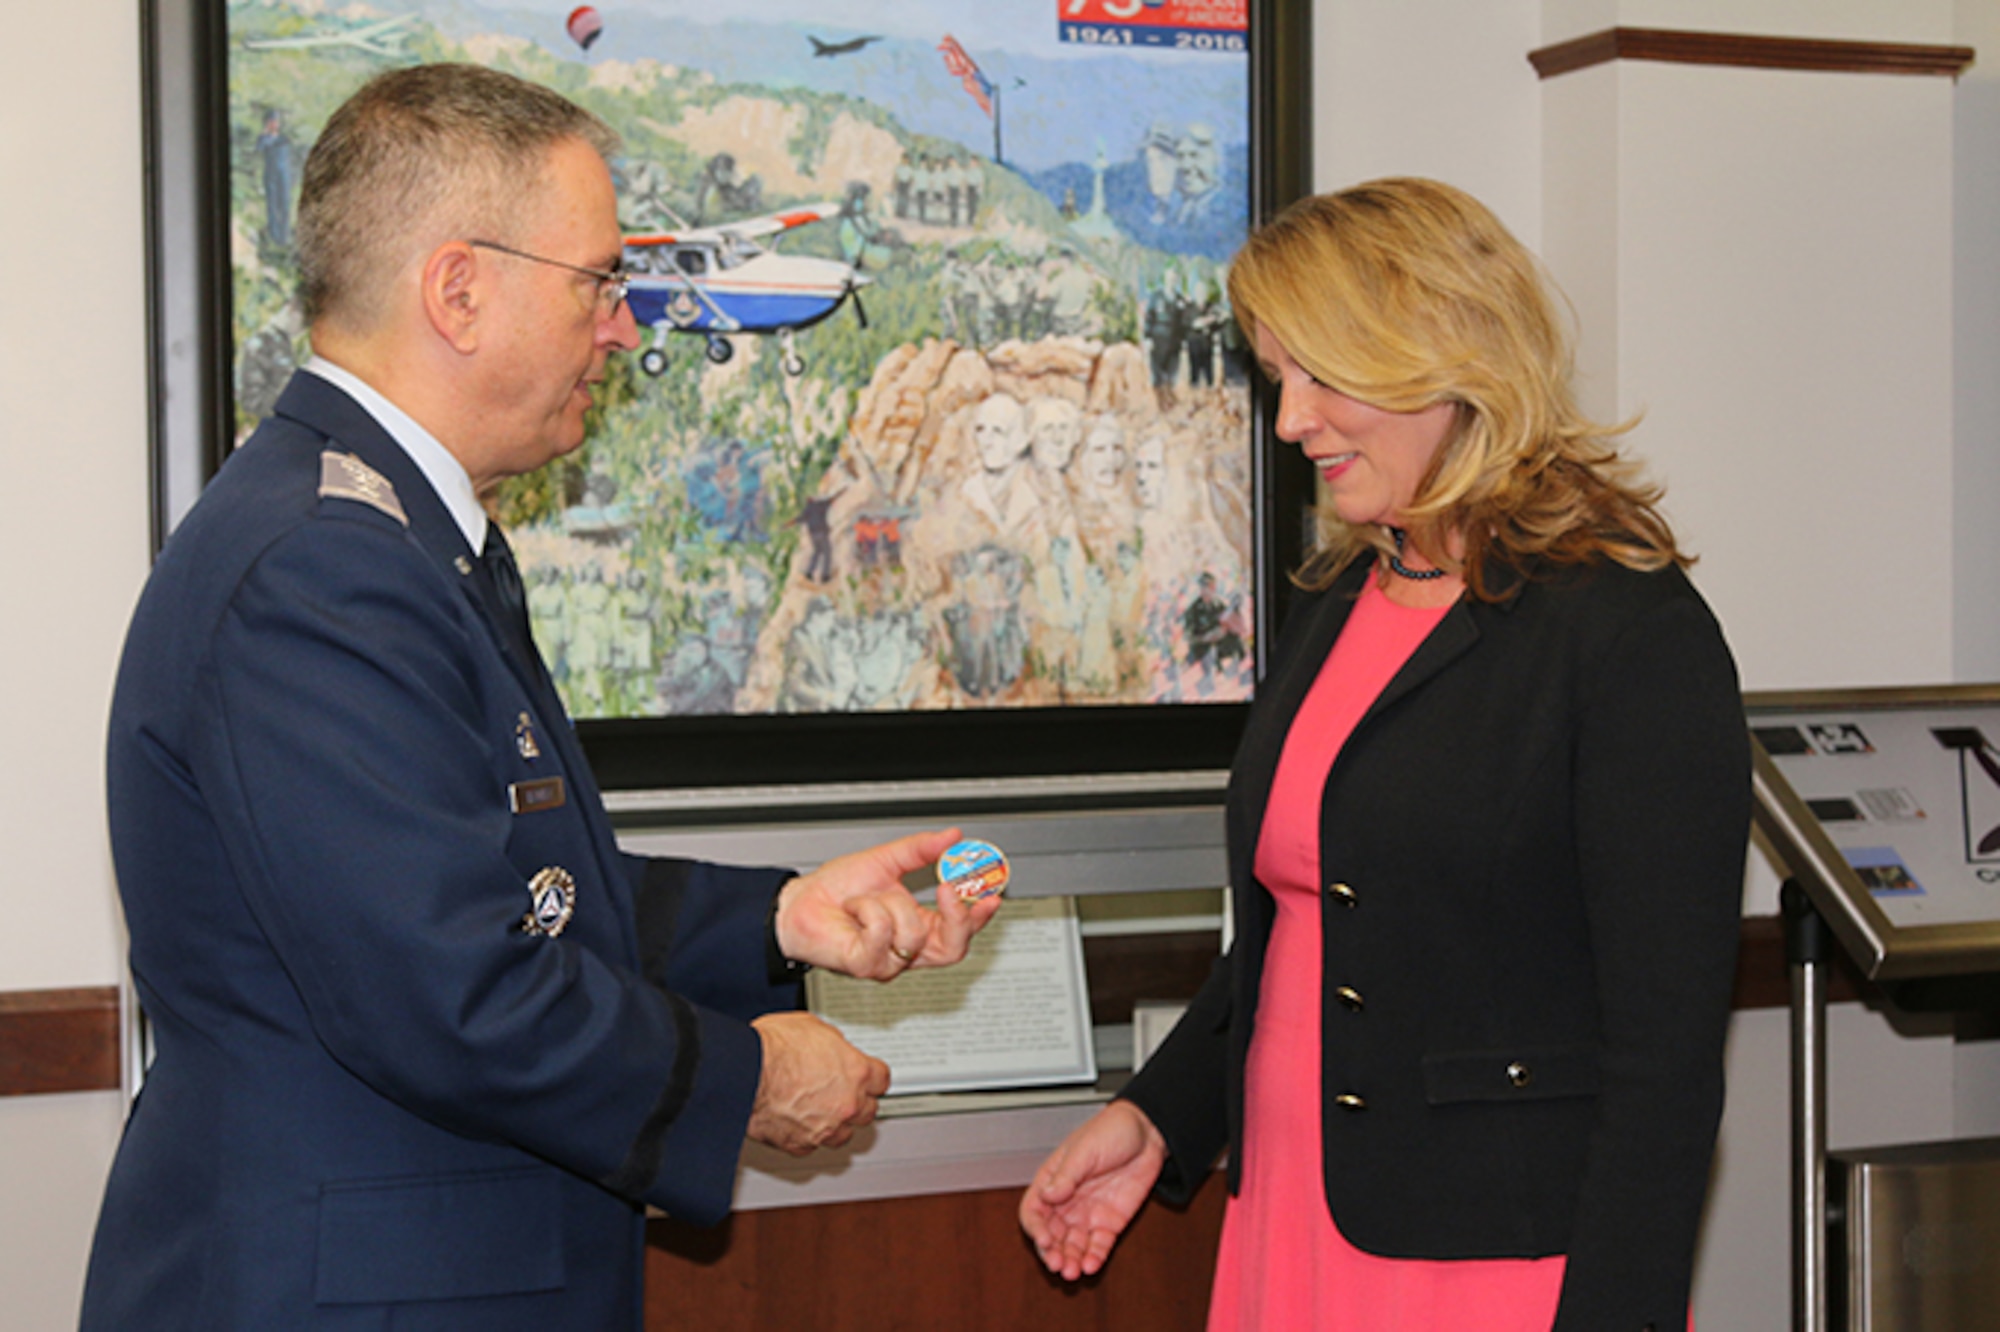 “Welcome to your Air Force Auxiliary,” said Maj. Gen. Joe Vazquez, Civil Air Patrol’s national commander, who presented Secretary of the Air Force Deborah Lee James with the organization’s 75th anniversary coin. More information about CAP’s anniversary can be found at www.CAP75th.com. 